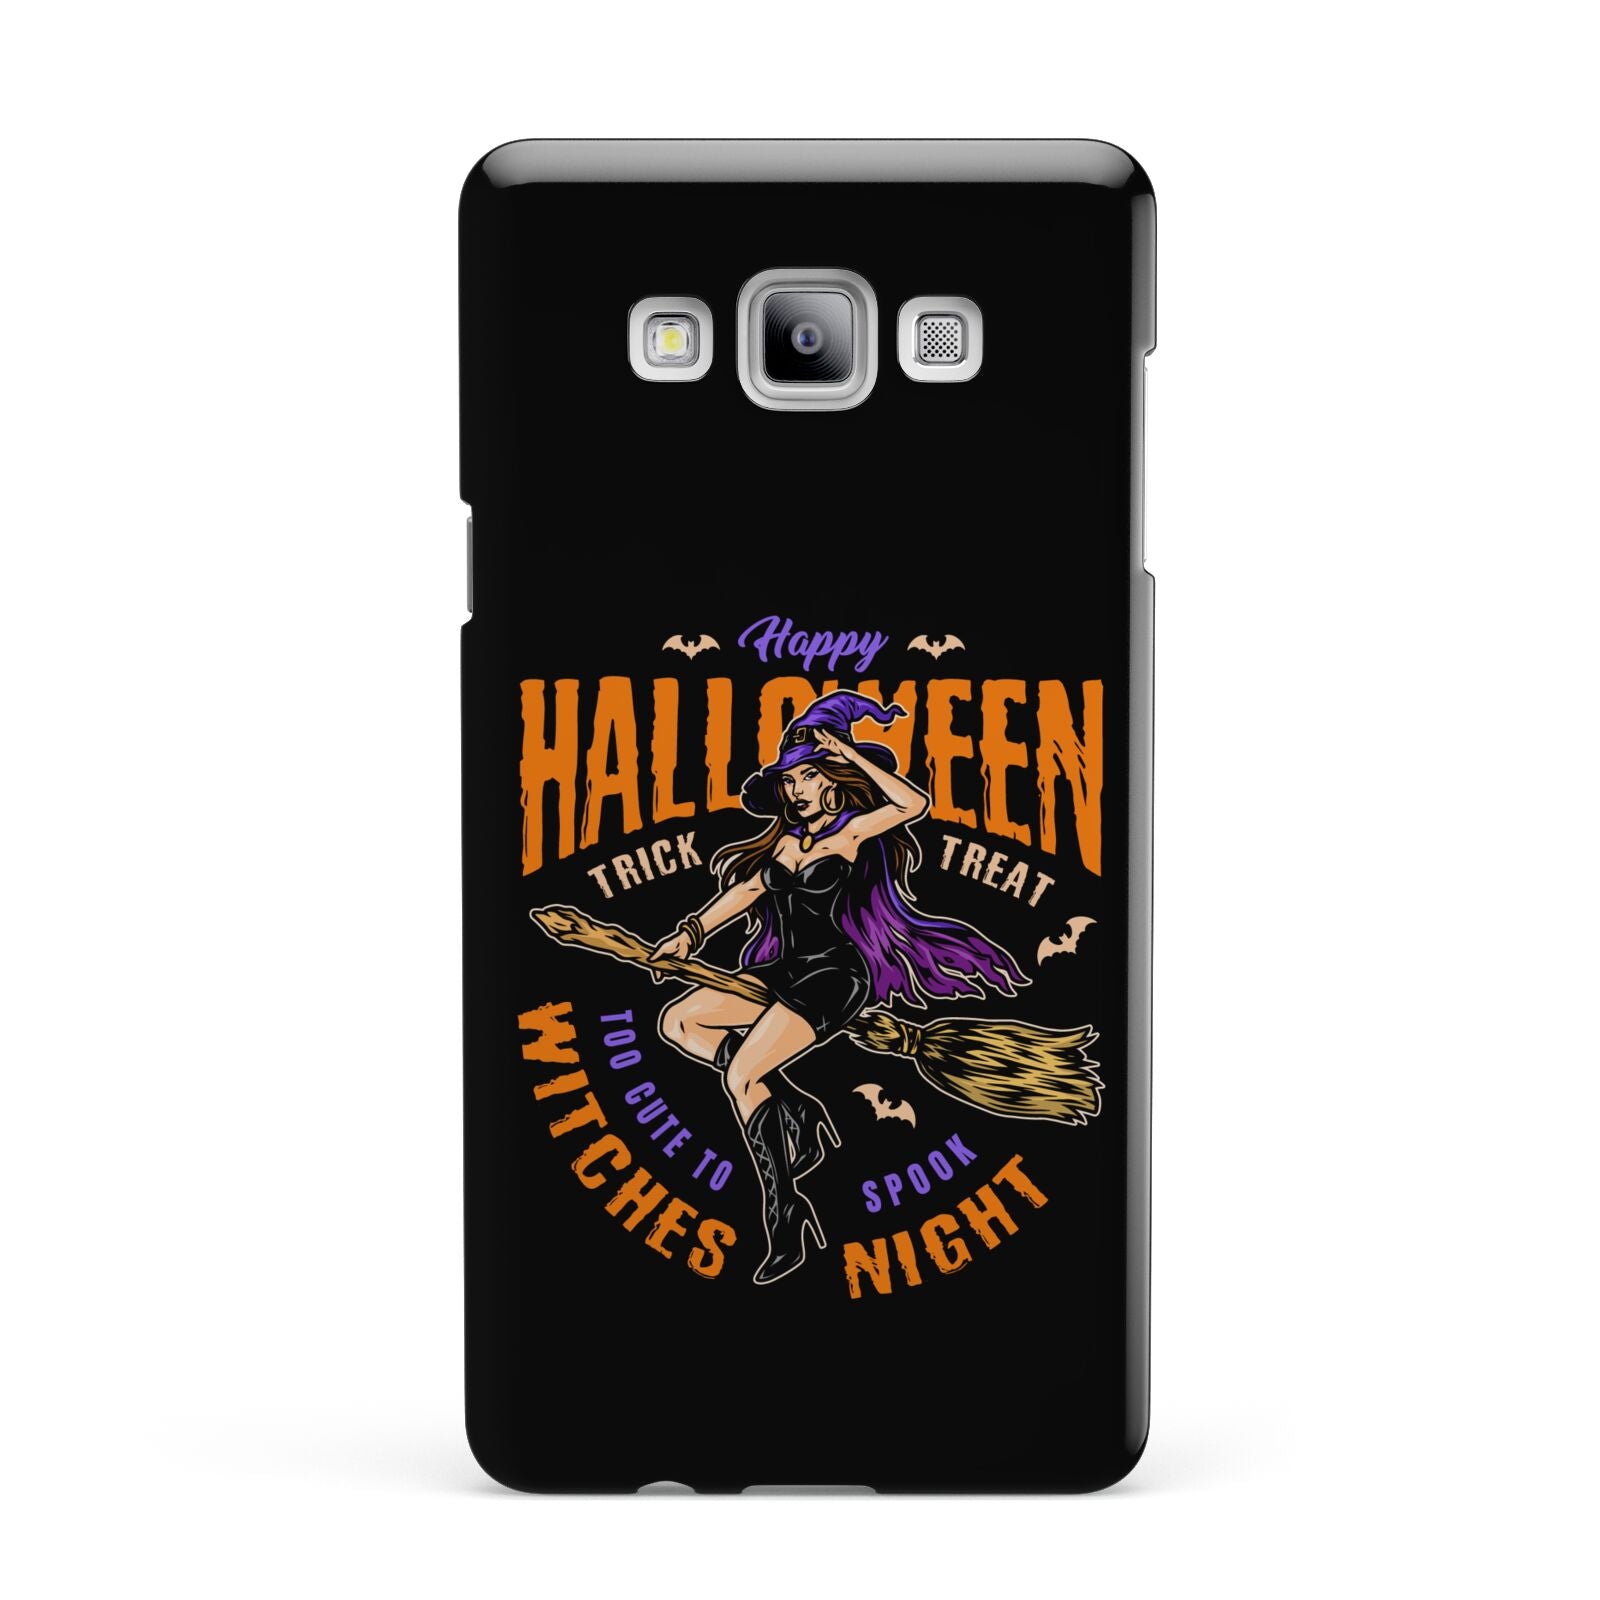 Witches Night Samsung Galaxy A7 2015 Case